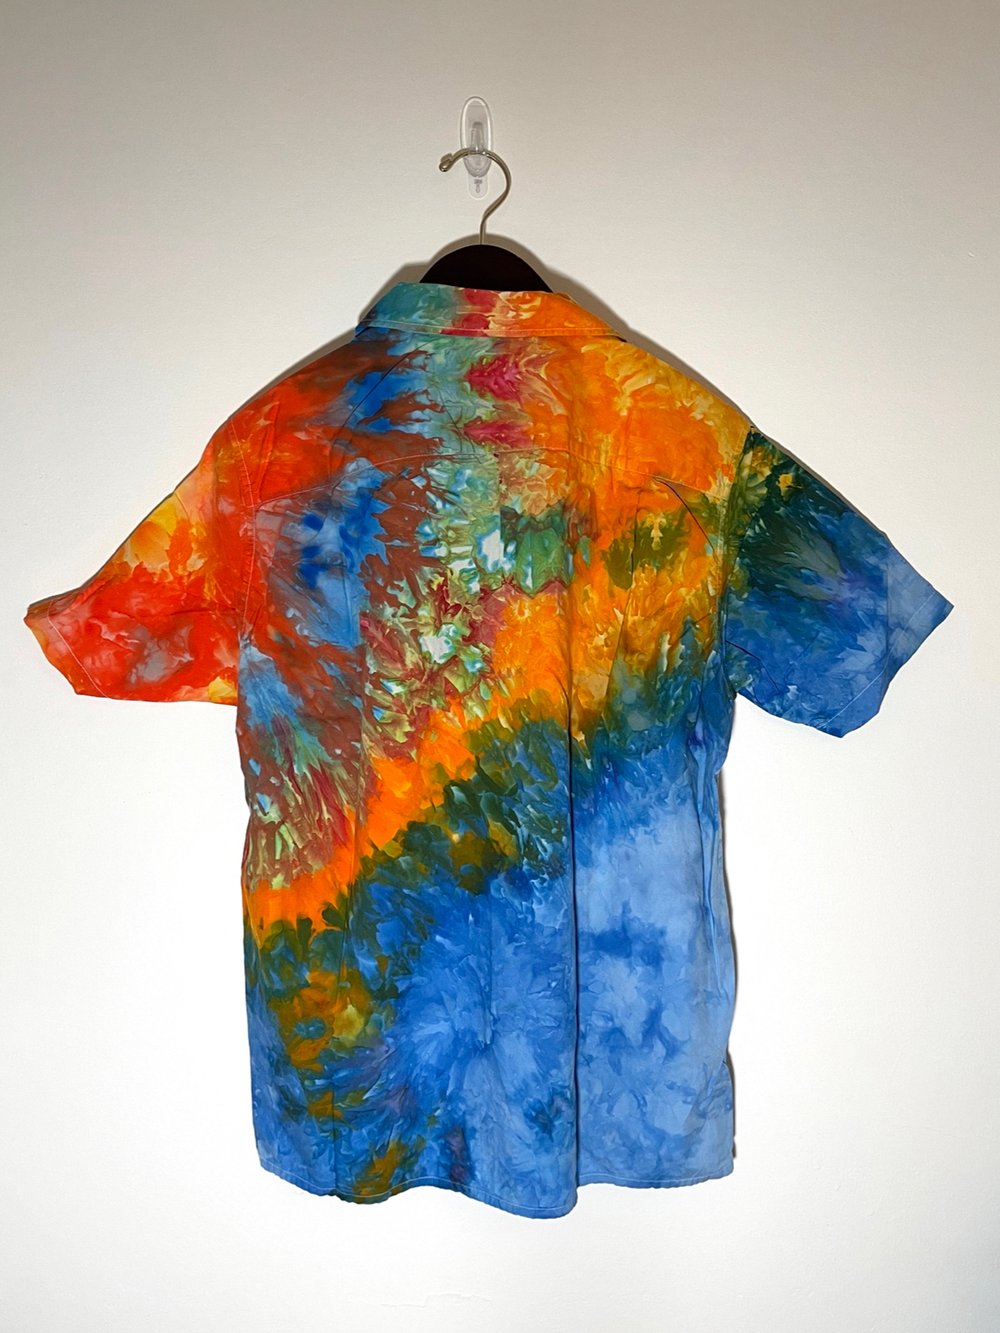 Tie Dye Button-up #6 - Small